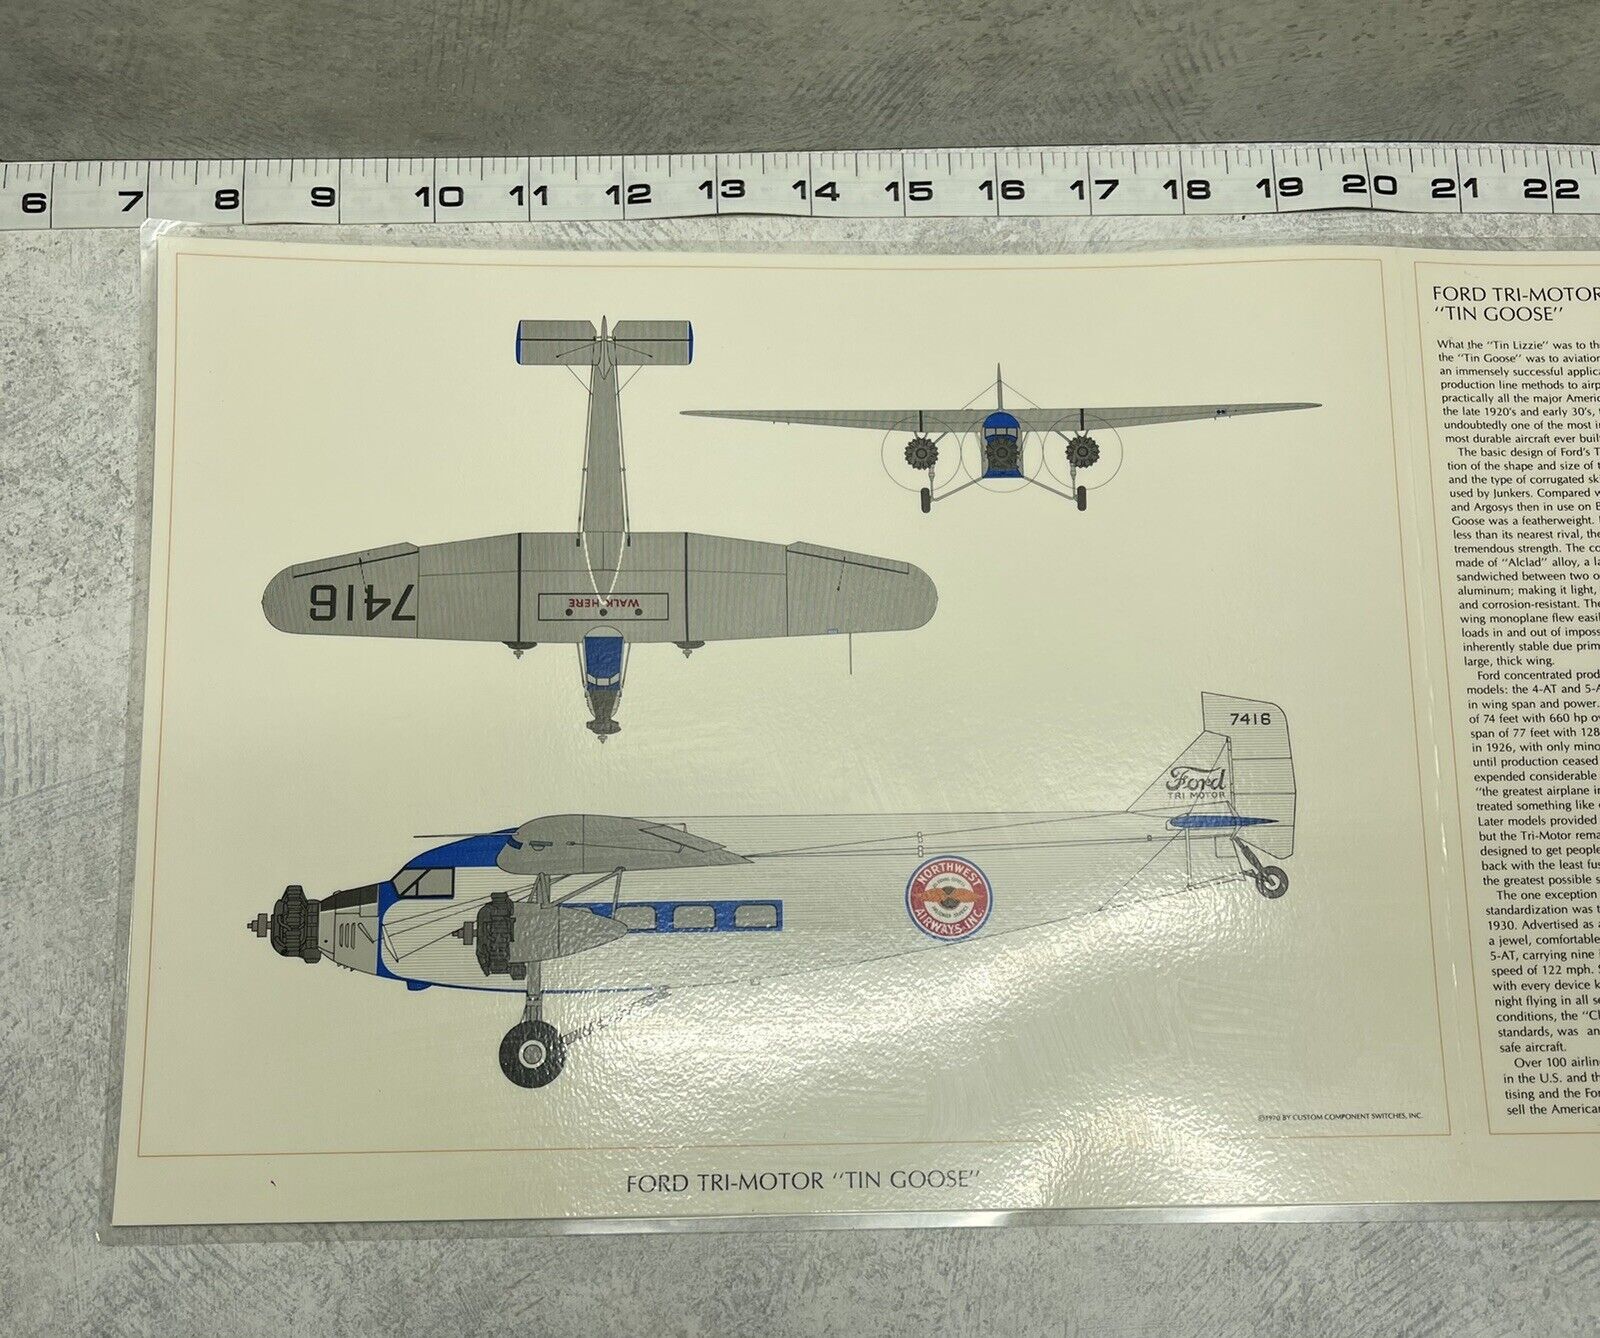 Aviation Commercial Northwest Airways Ford TRI-Motor “Tin Goose” 10x20 Laminated